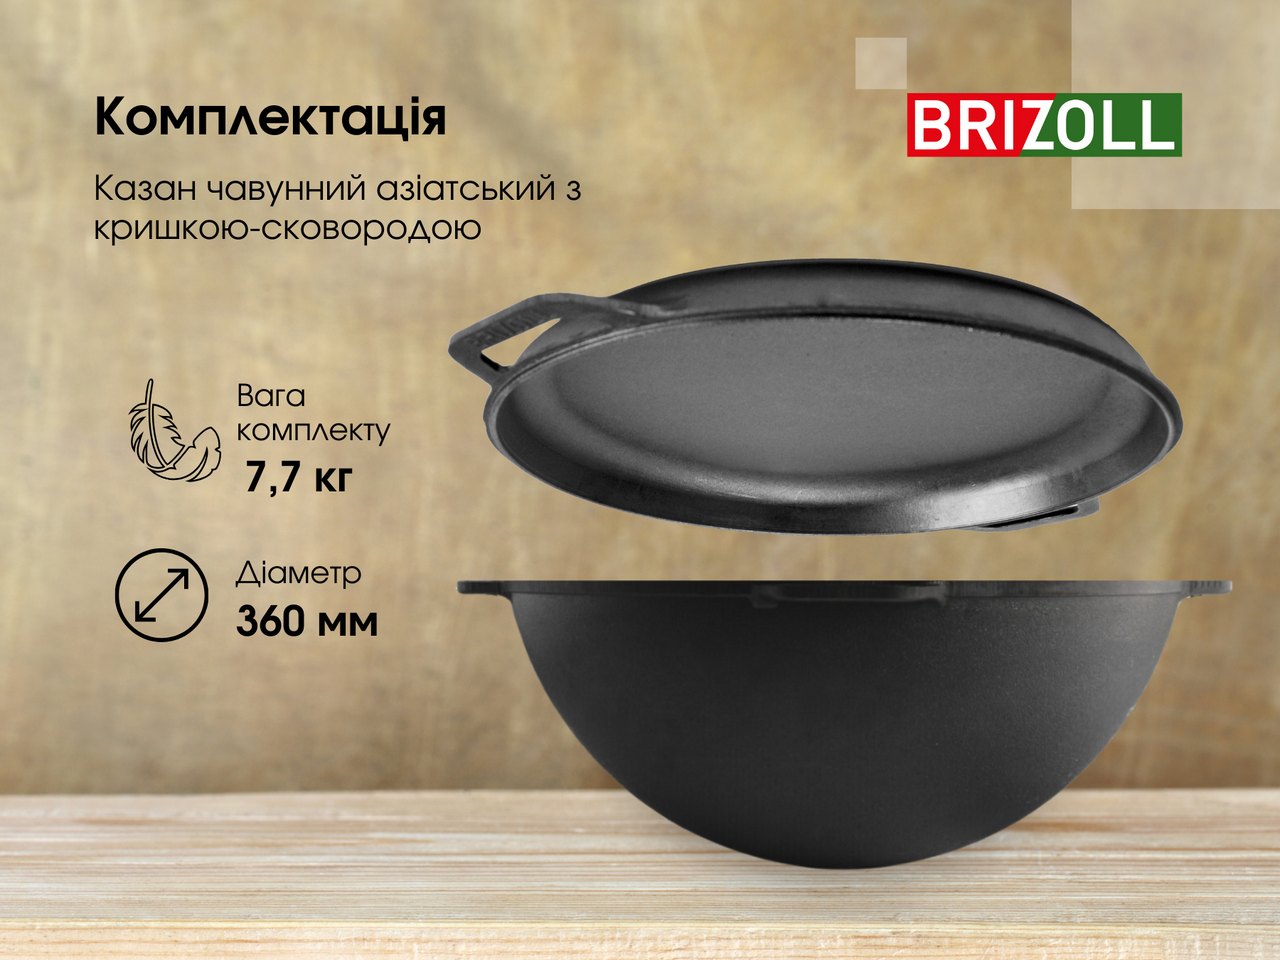 Cast iron asian cauldron 8 L WITH A LID-FRYING PAN, a stand and a bag